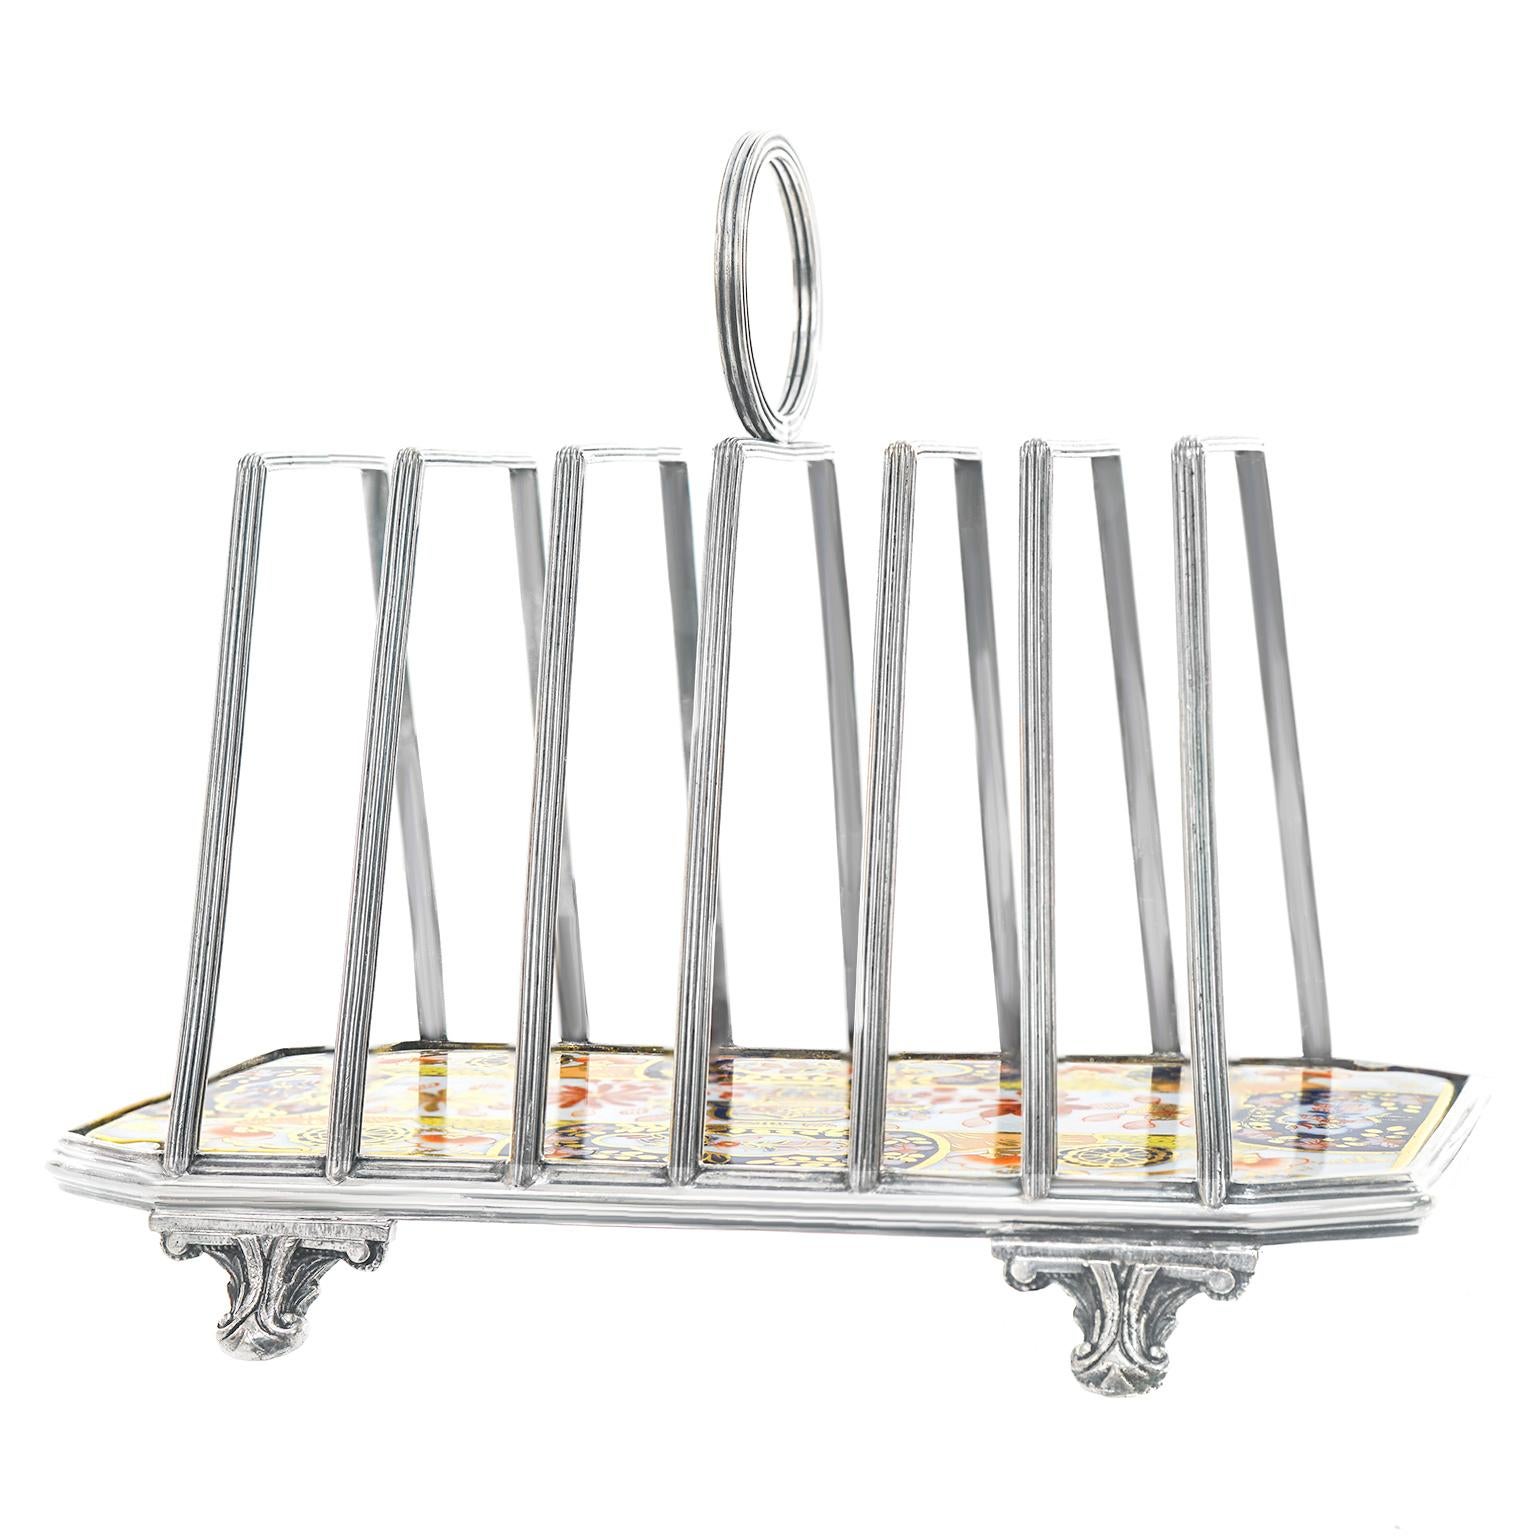 Mid-19th Century Copeland Toast Rack Silverplate, c1860s, England For Sale